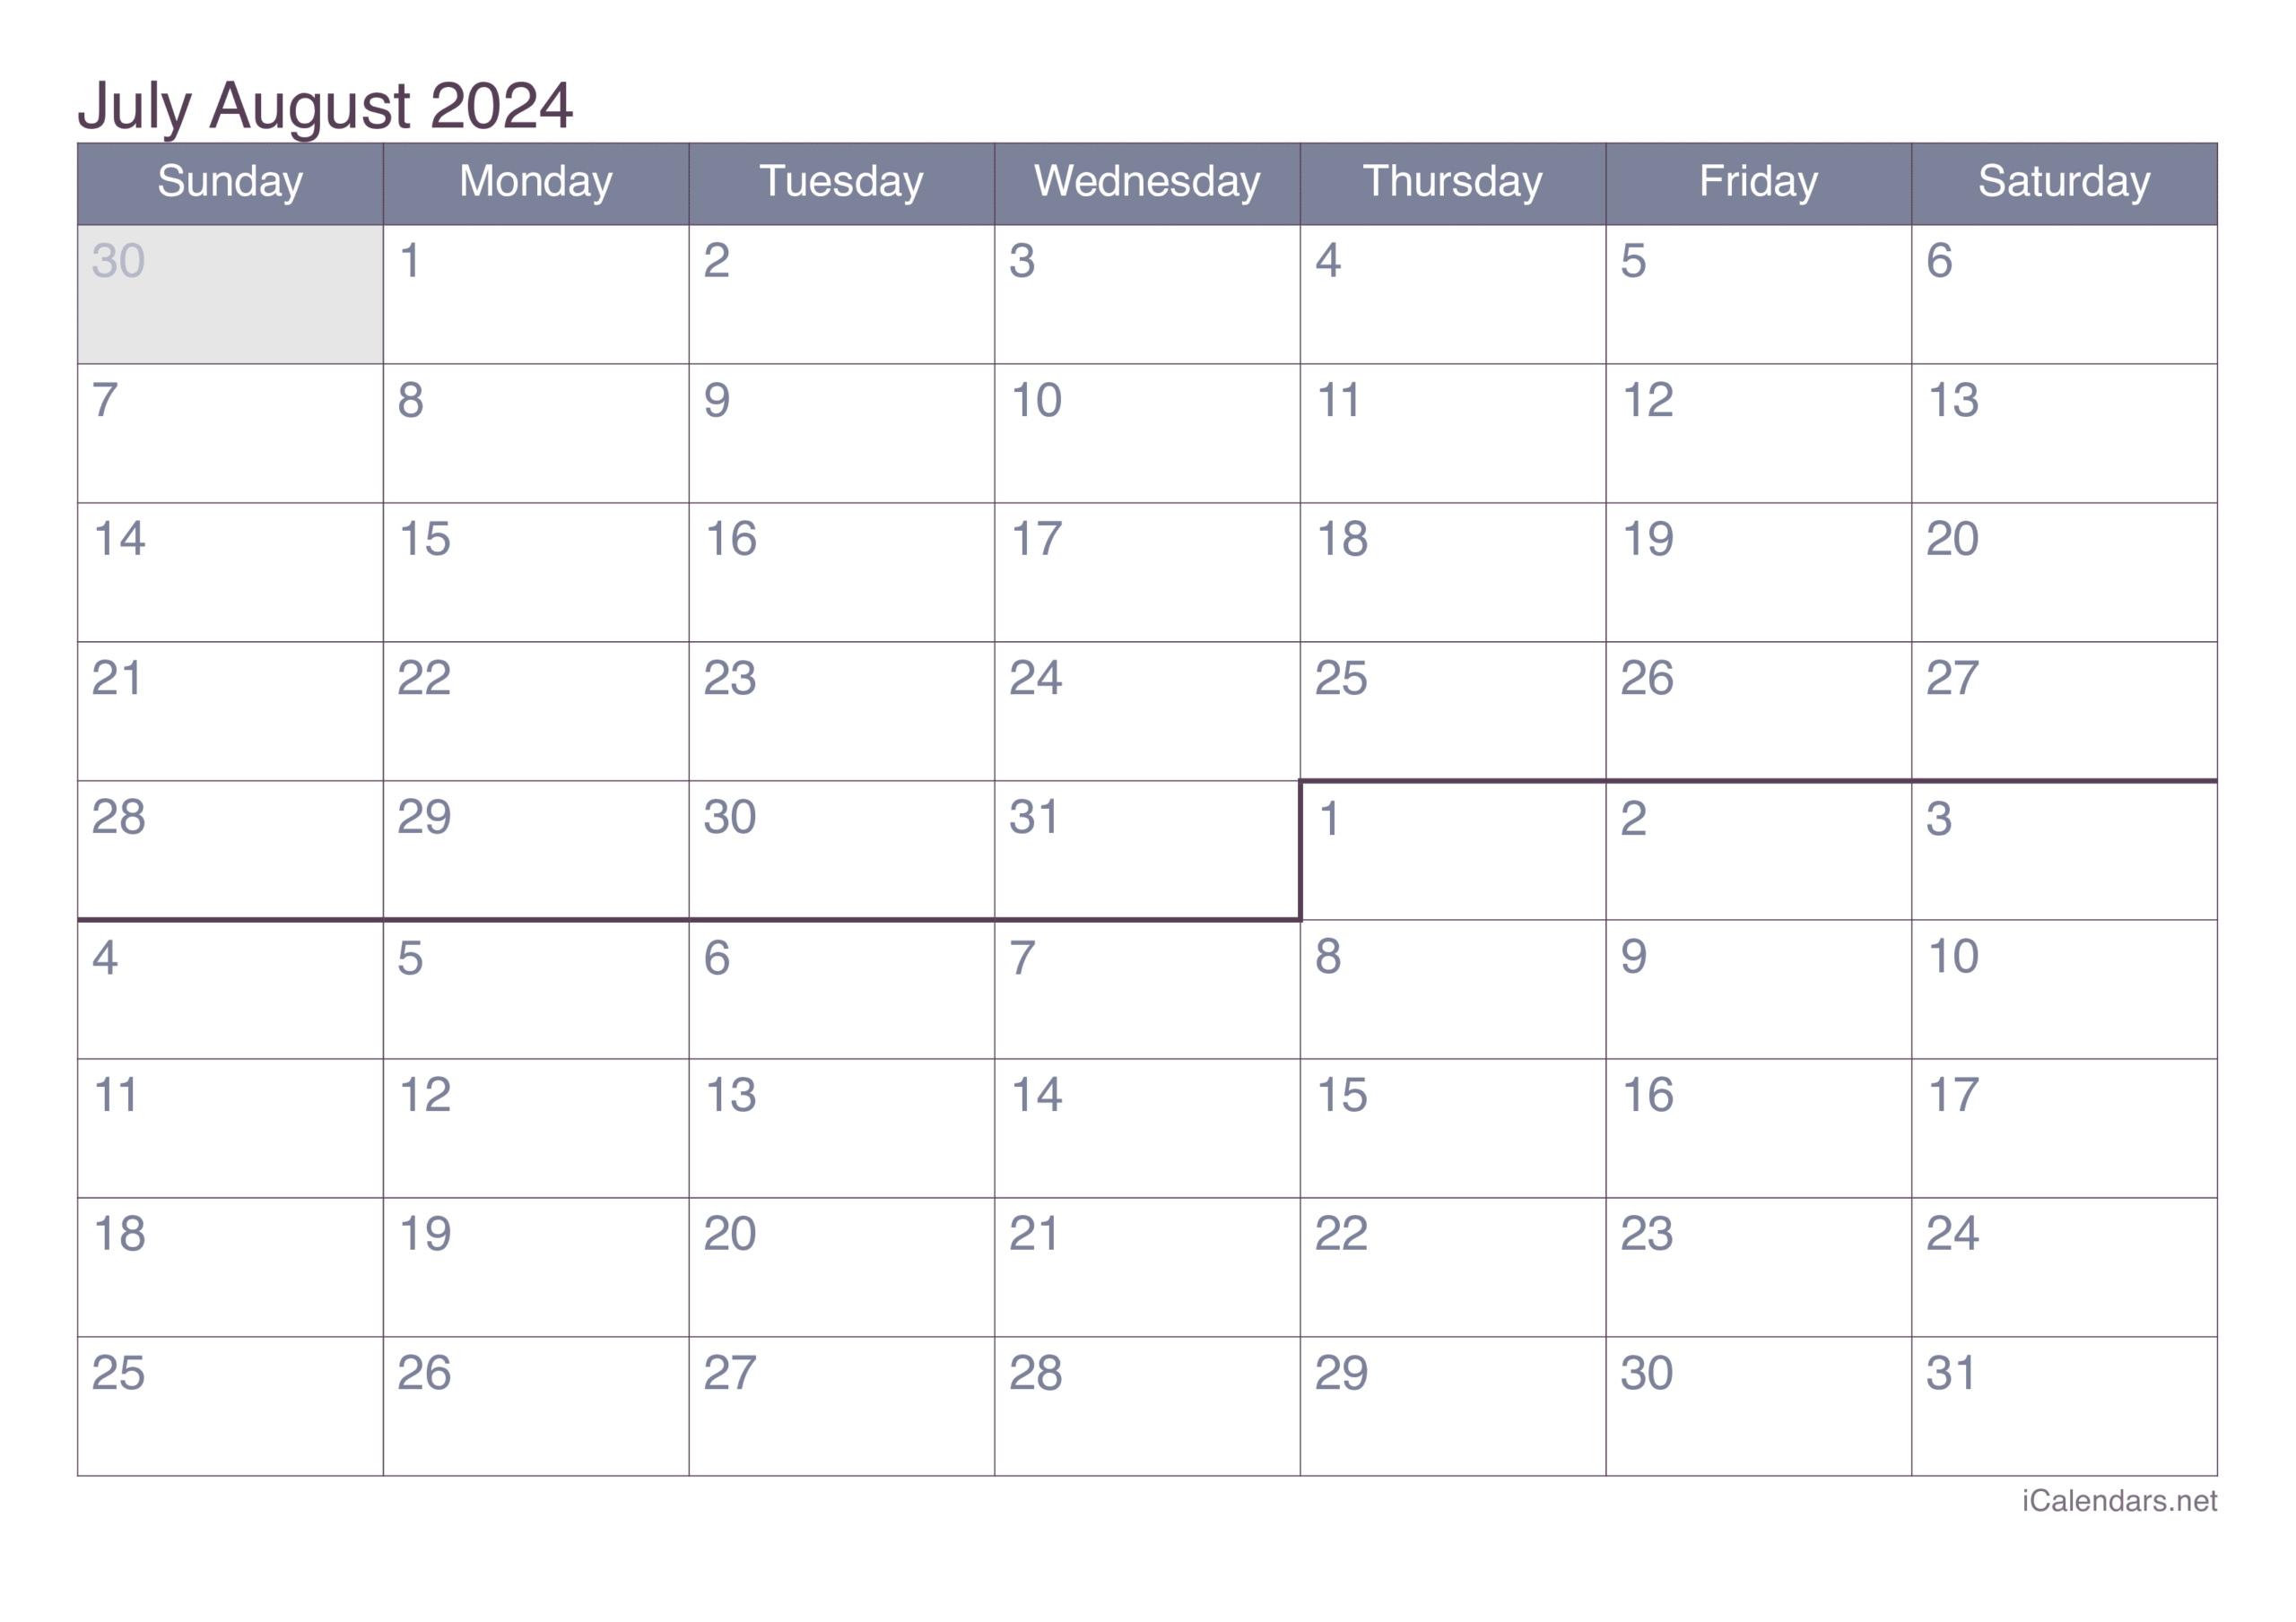 July And August 2024 Printable Calendar intended for Calendar July 2024 and August 2024